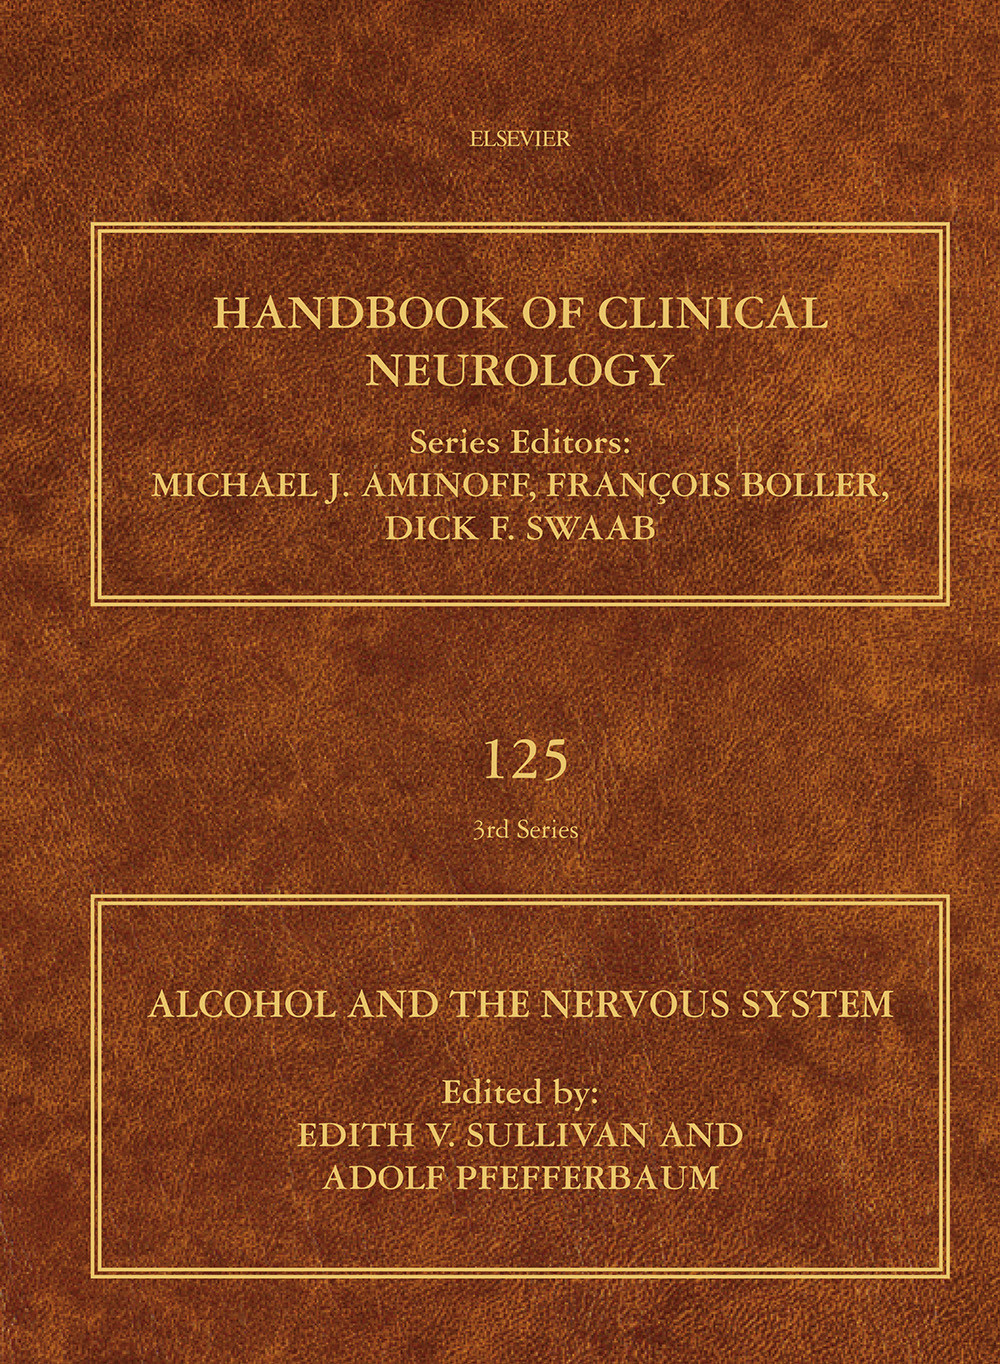 Alcohol and the Nervous System